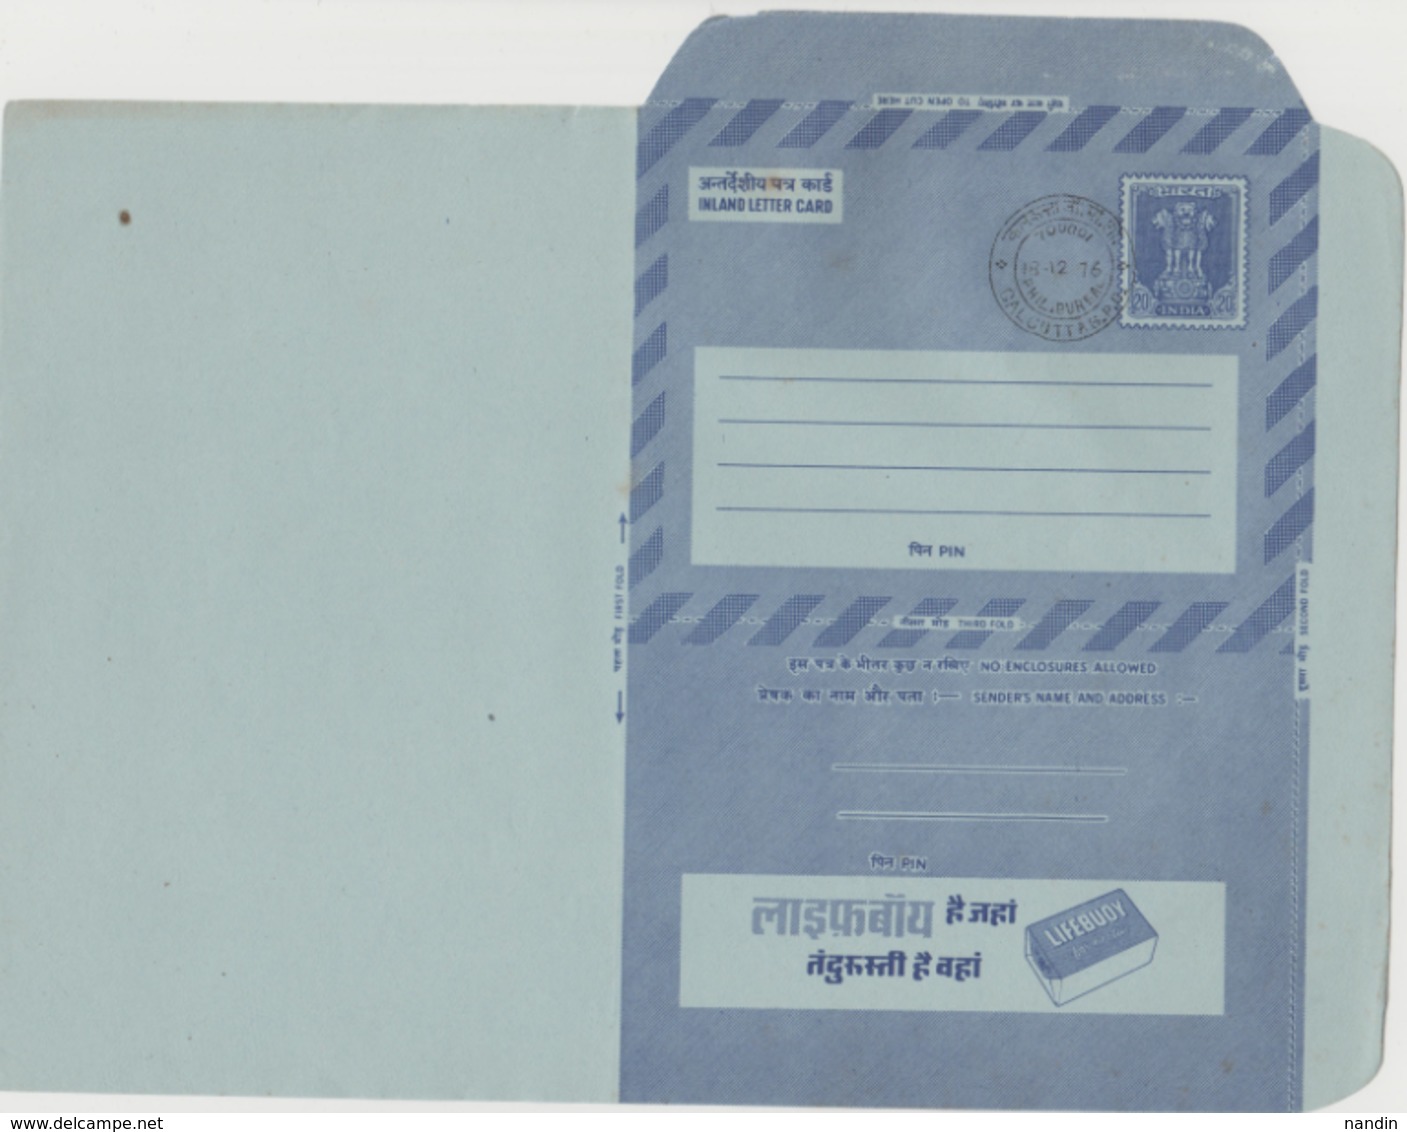 INDIA POSTAL STATIONERY INLAND LETTER CARD.20P  ADVERTISEMENT LIFEBOUY(Hindi) 1st DAY CANCELLED - Inland Letter Cards